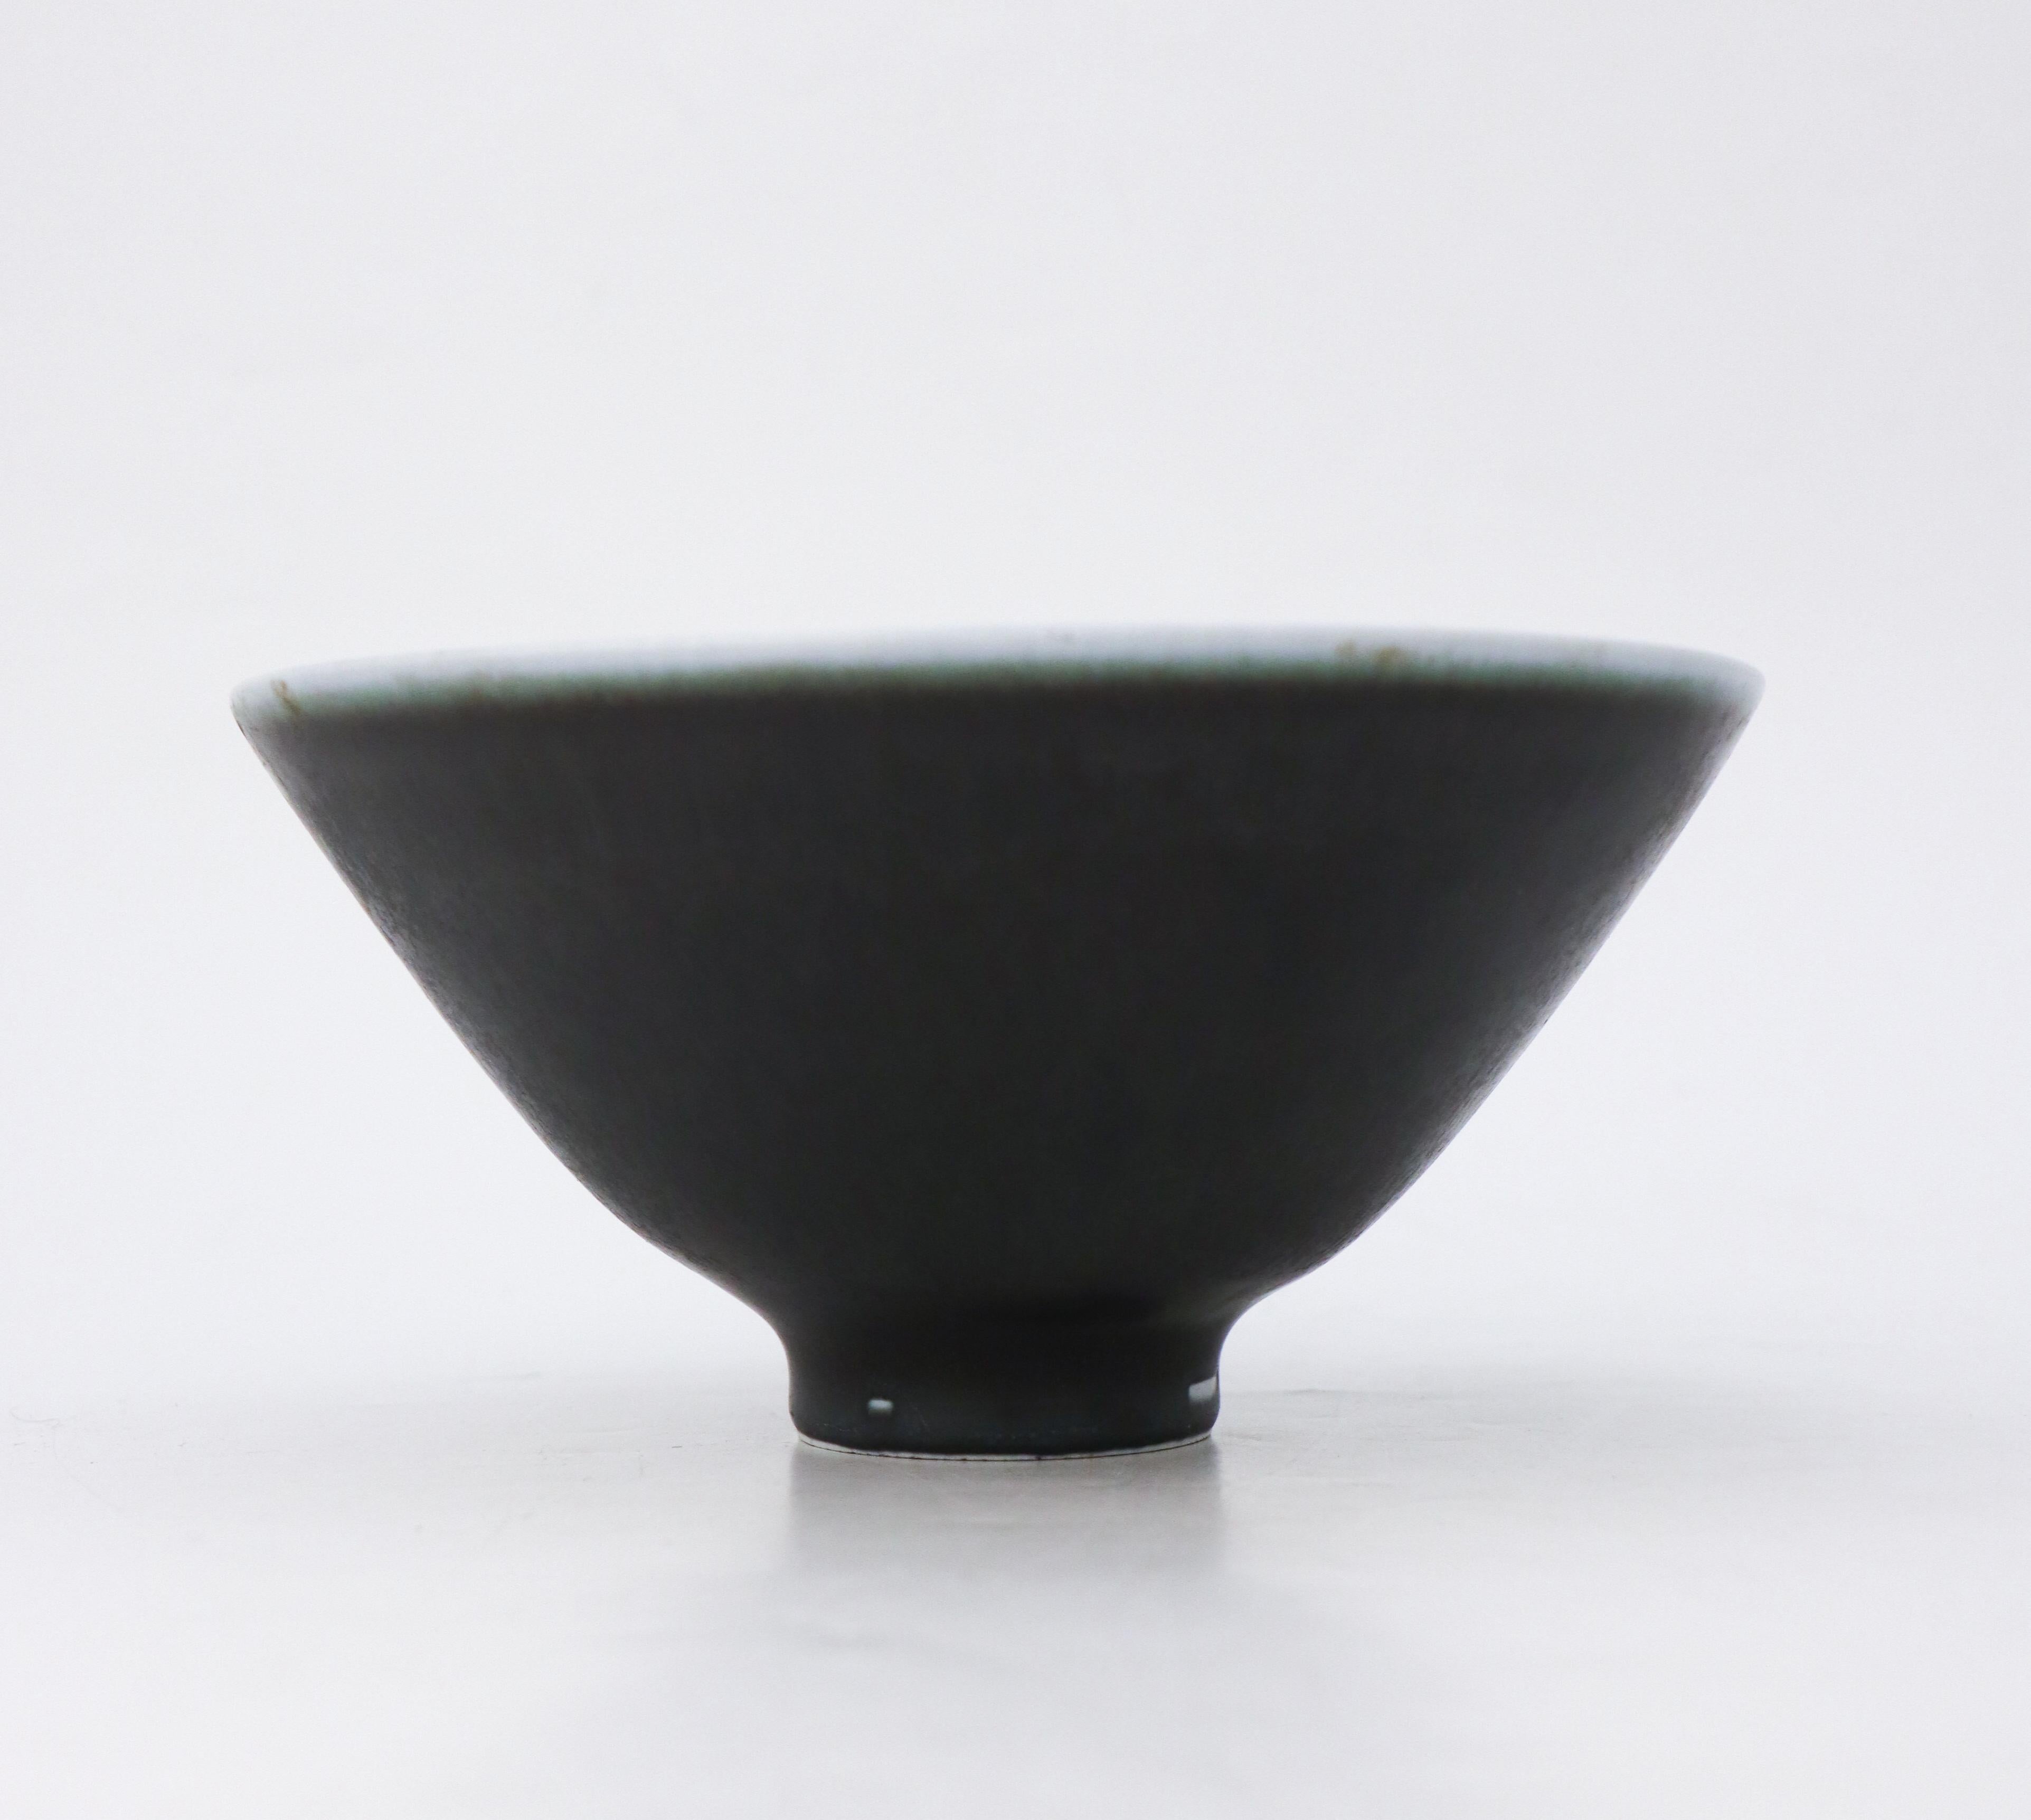 A lovely black bowl designed by Carl-Harry Stålhane at Rörstrand, the bowl is 18.5 cm in diameter at the top and 9.5 cm high. It is in excellent condition except from some minor marks in the glaze near the base why it is marked as 2nd